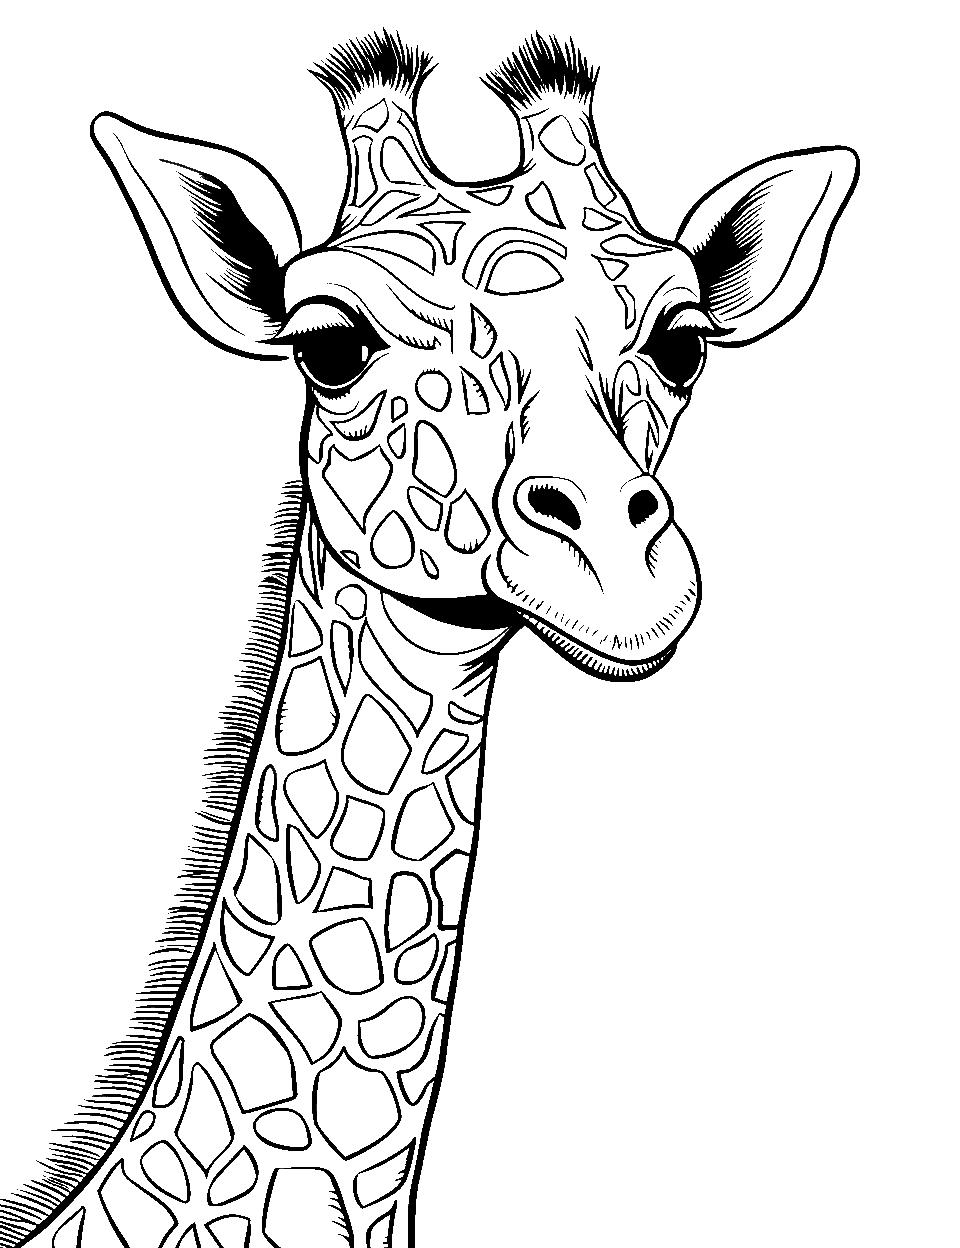 Detailed Giraffe Portrait Coloring Page - Close-up view of a giraffe’s face, focusing on the eyes and patterns.